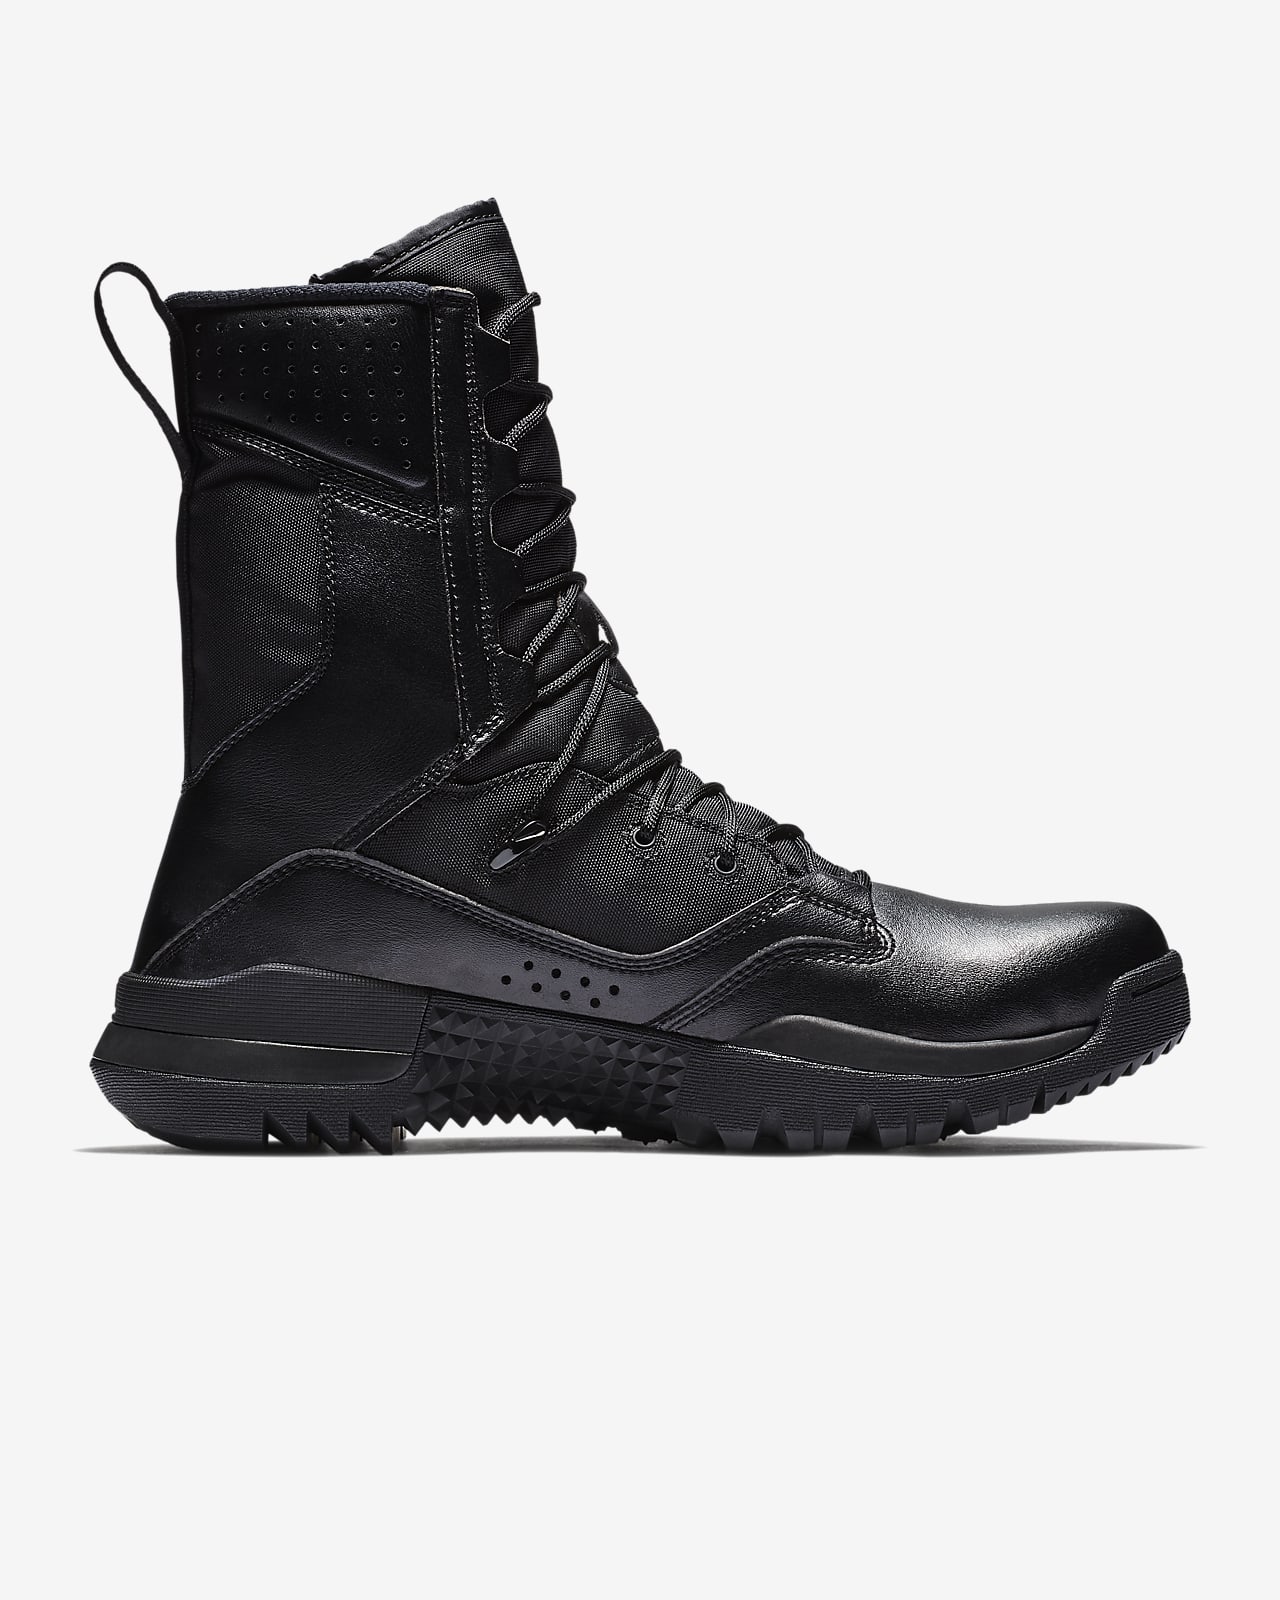 Refrigerate Evaluable assistant Nike SFB Field 2 8” Tactical Boots. Nike.com